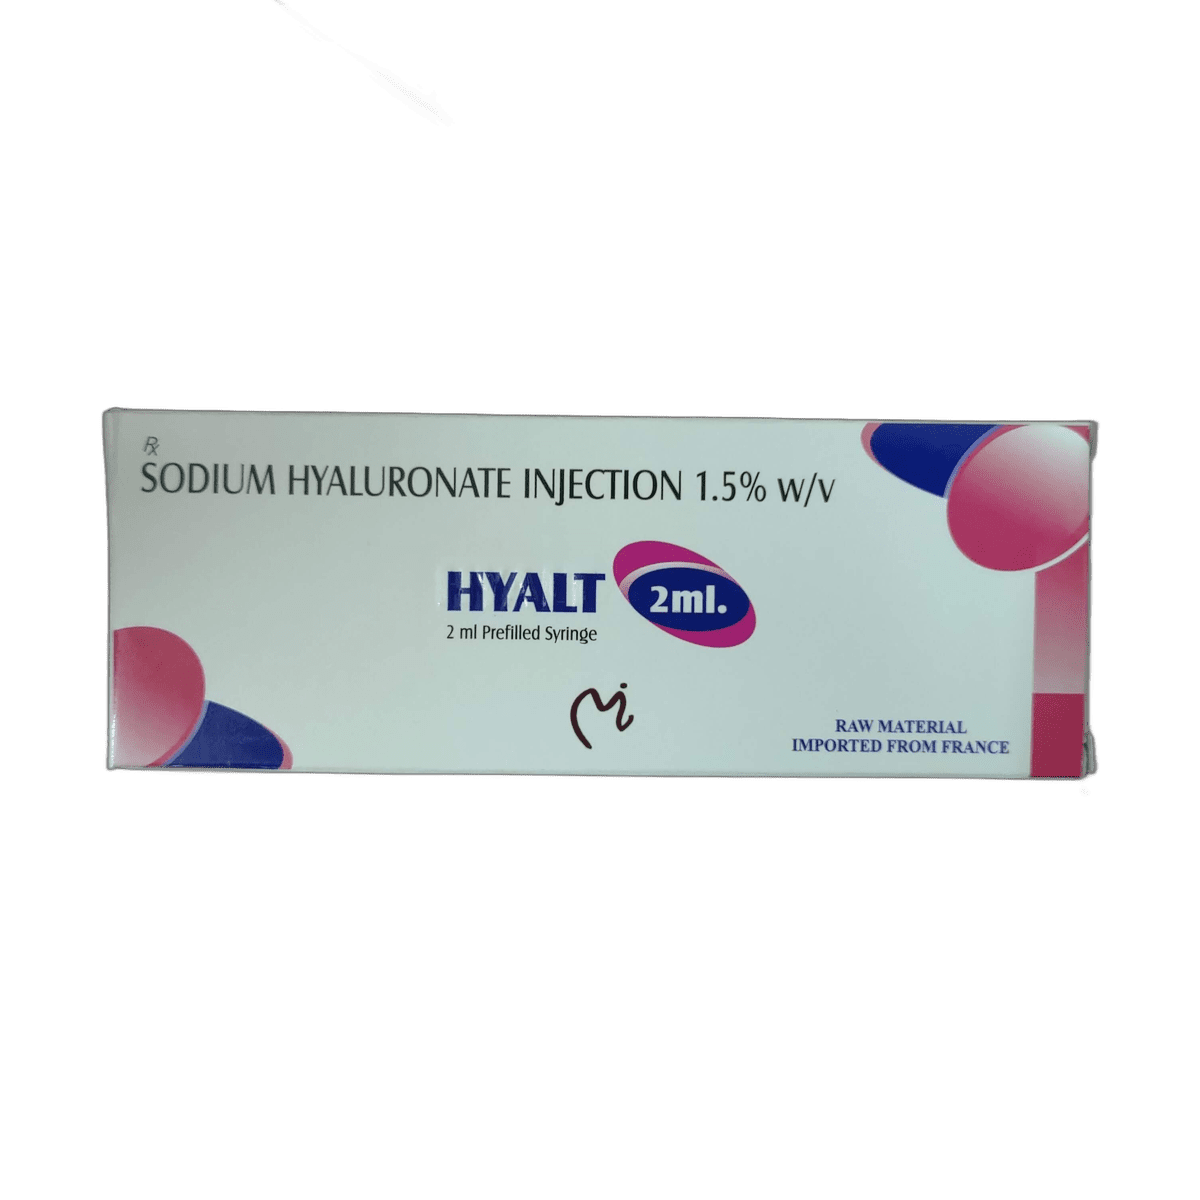 HYALT Advanced Pain-Free Joint Formula Injection - 2ml and 6 ml